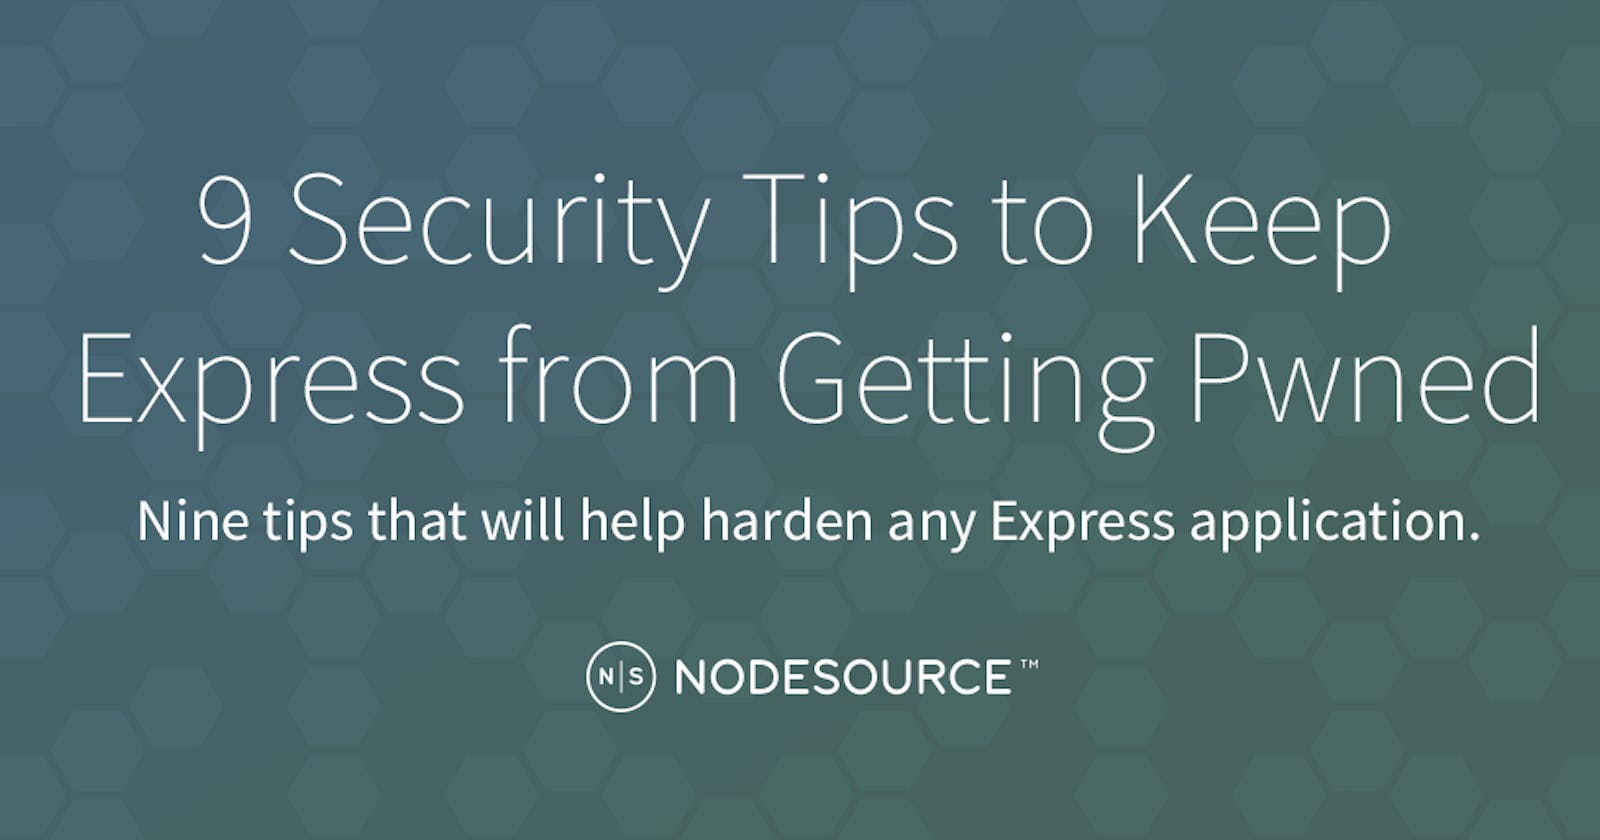 9 Security Tips to Keep Express from Getting Pwned